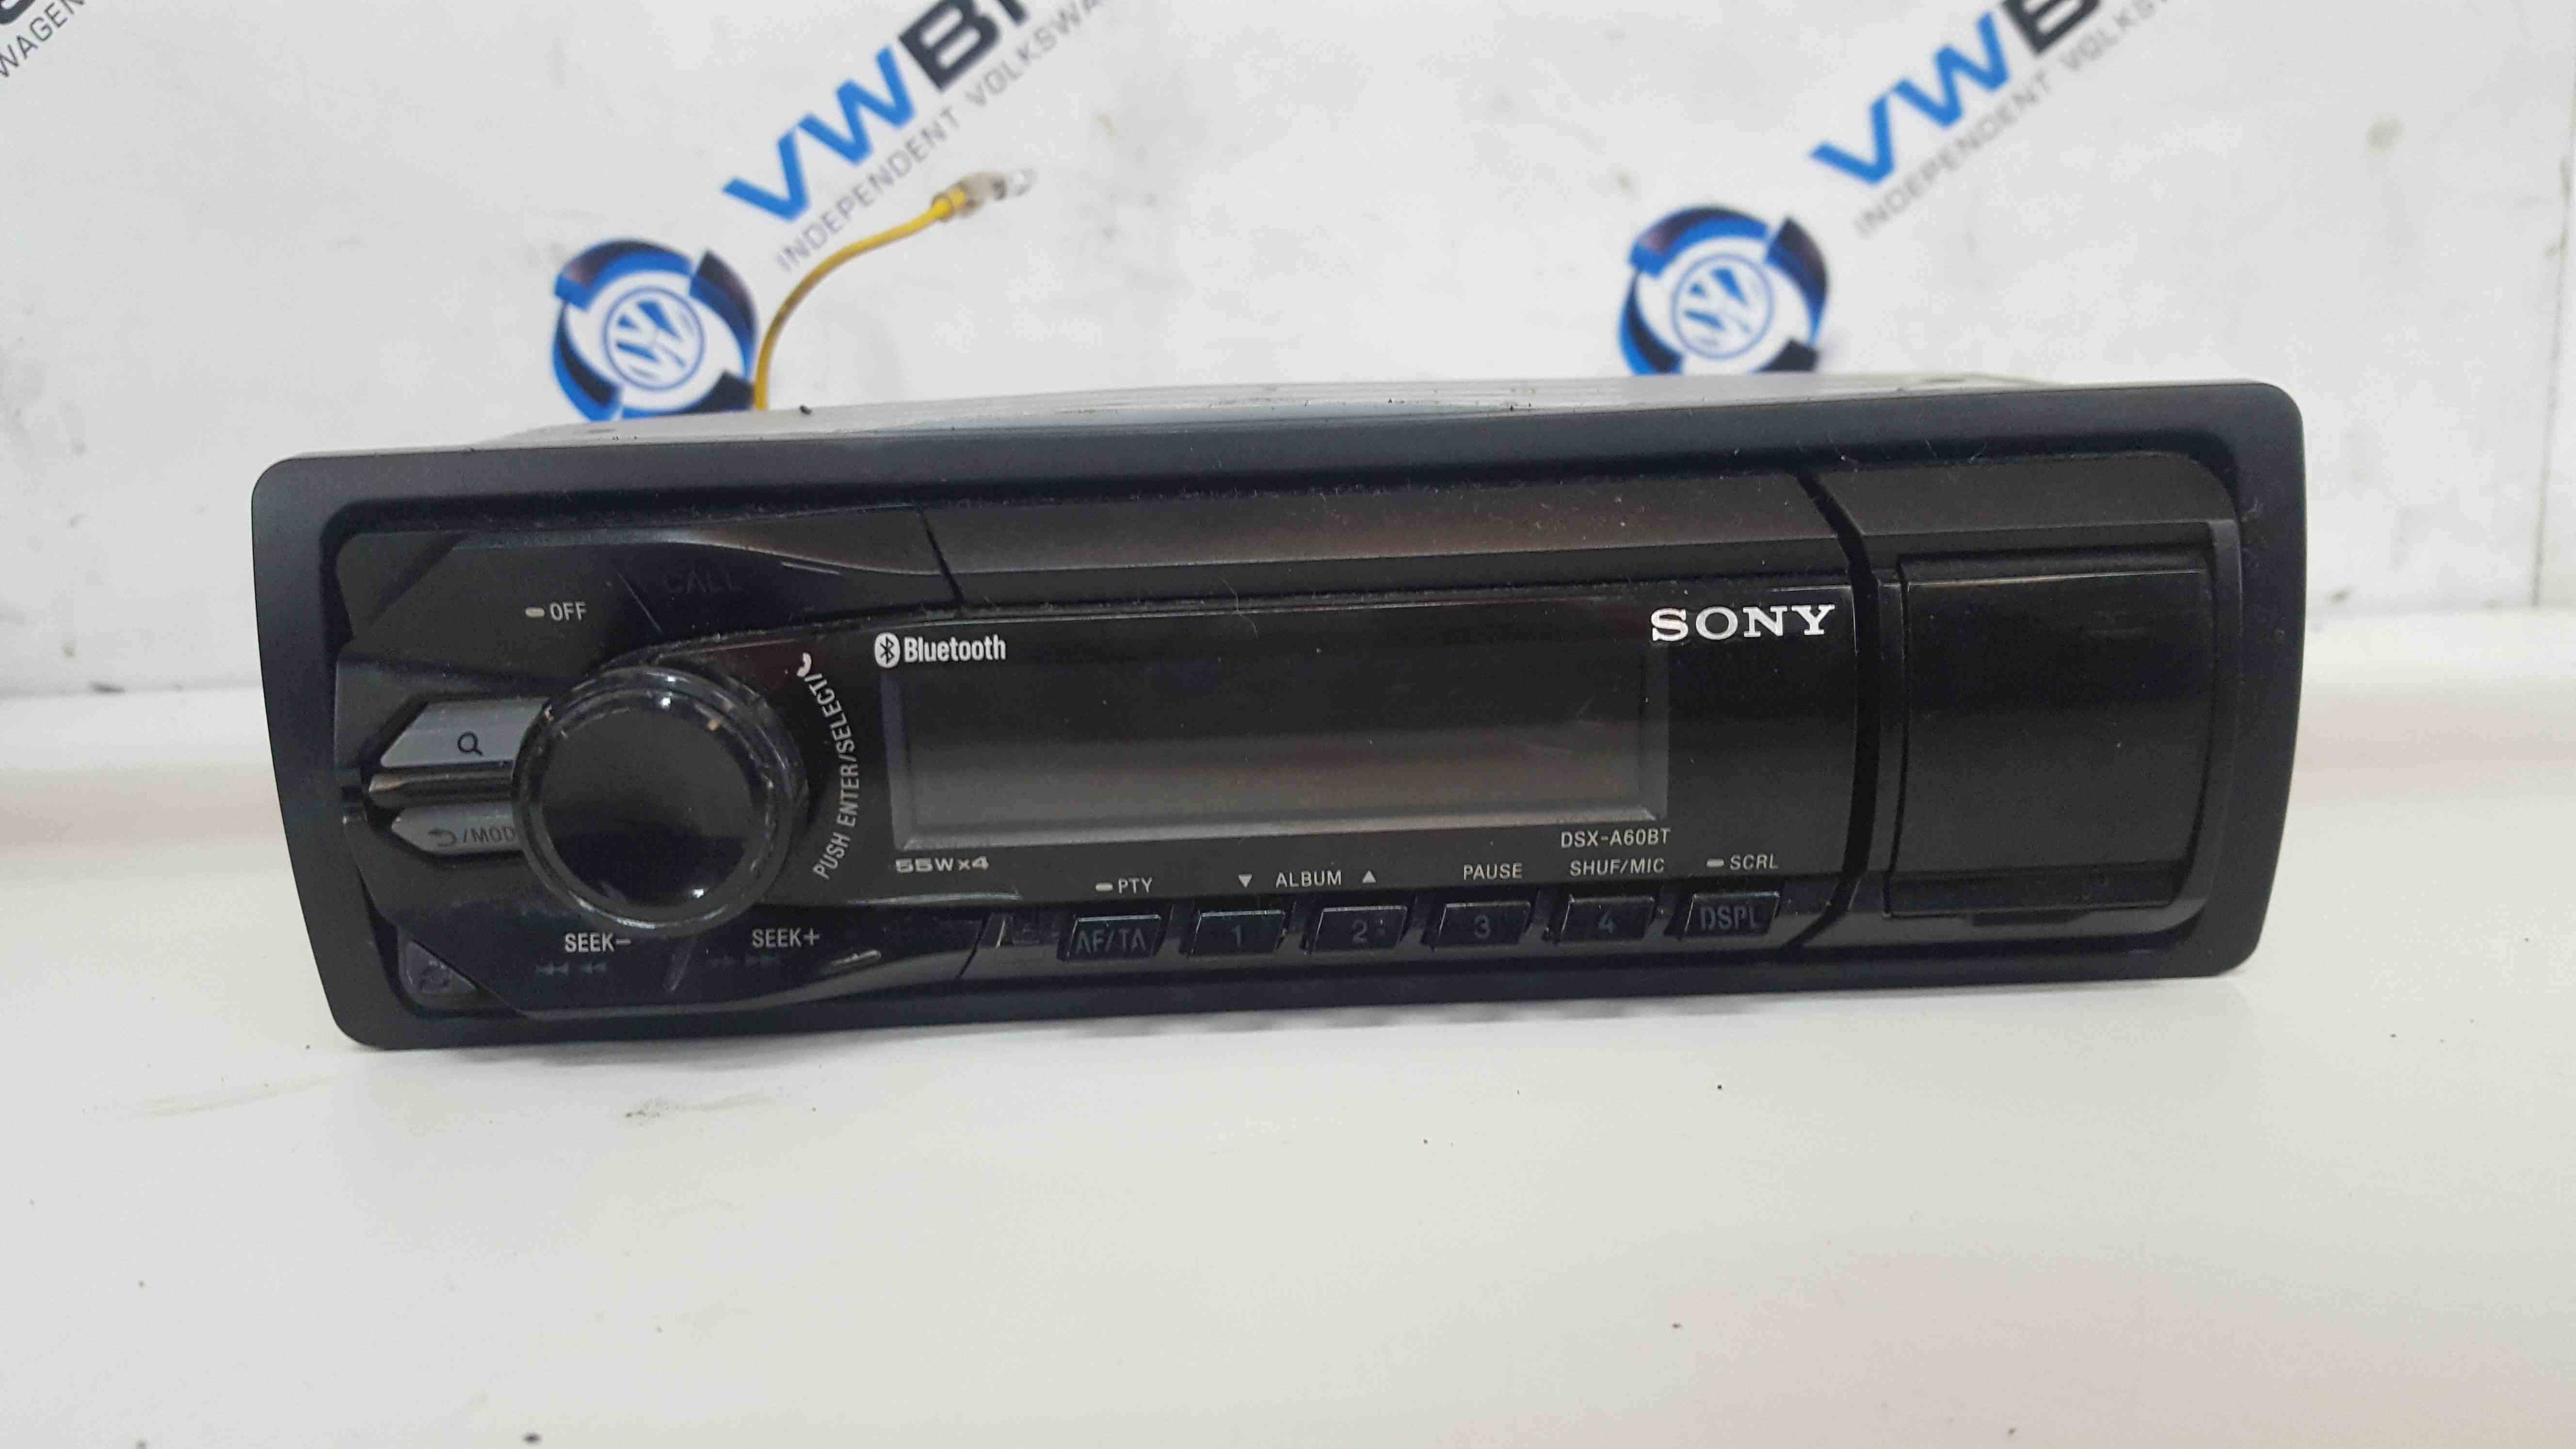 Renault Clio MK3 2005-2012 Radio Cd Player Sony Bluetooth USB DSXA60BT -  Store - Renault Breakers - Used Renault Car Parts & Spares Specialist